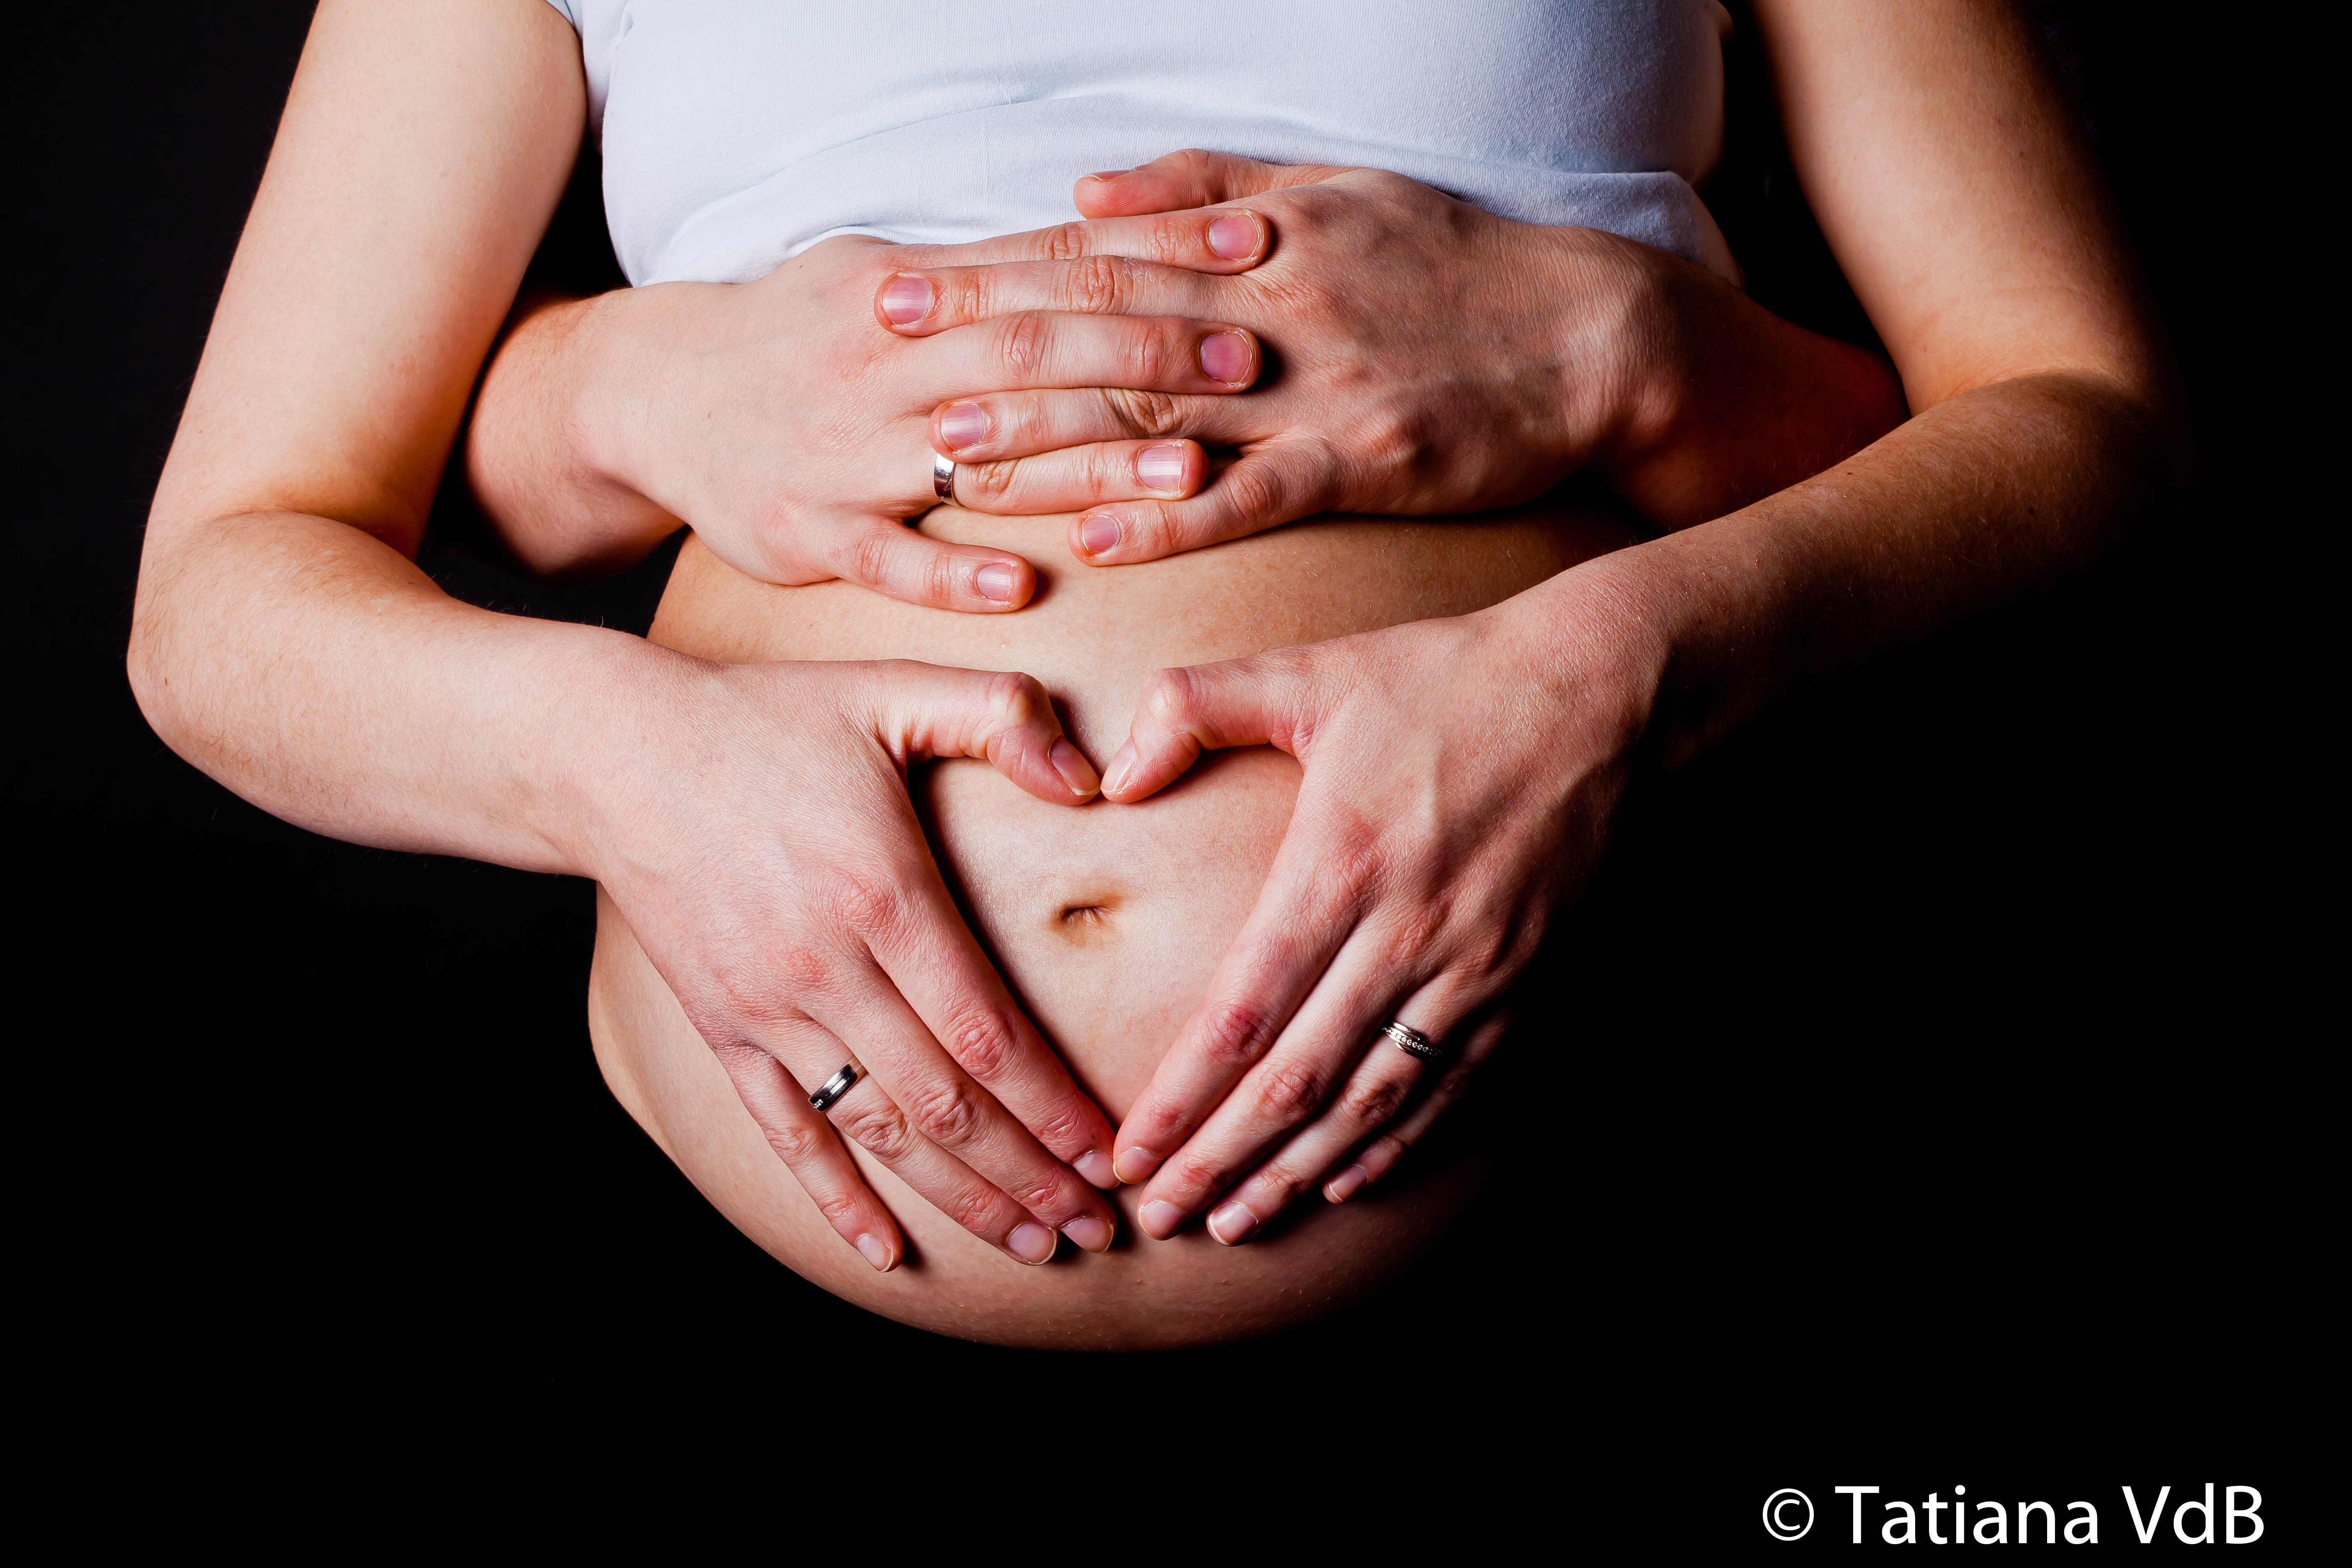 Research Spotlight: Sexual Functioning during Pregnancy